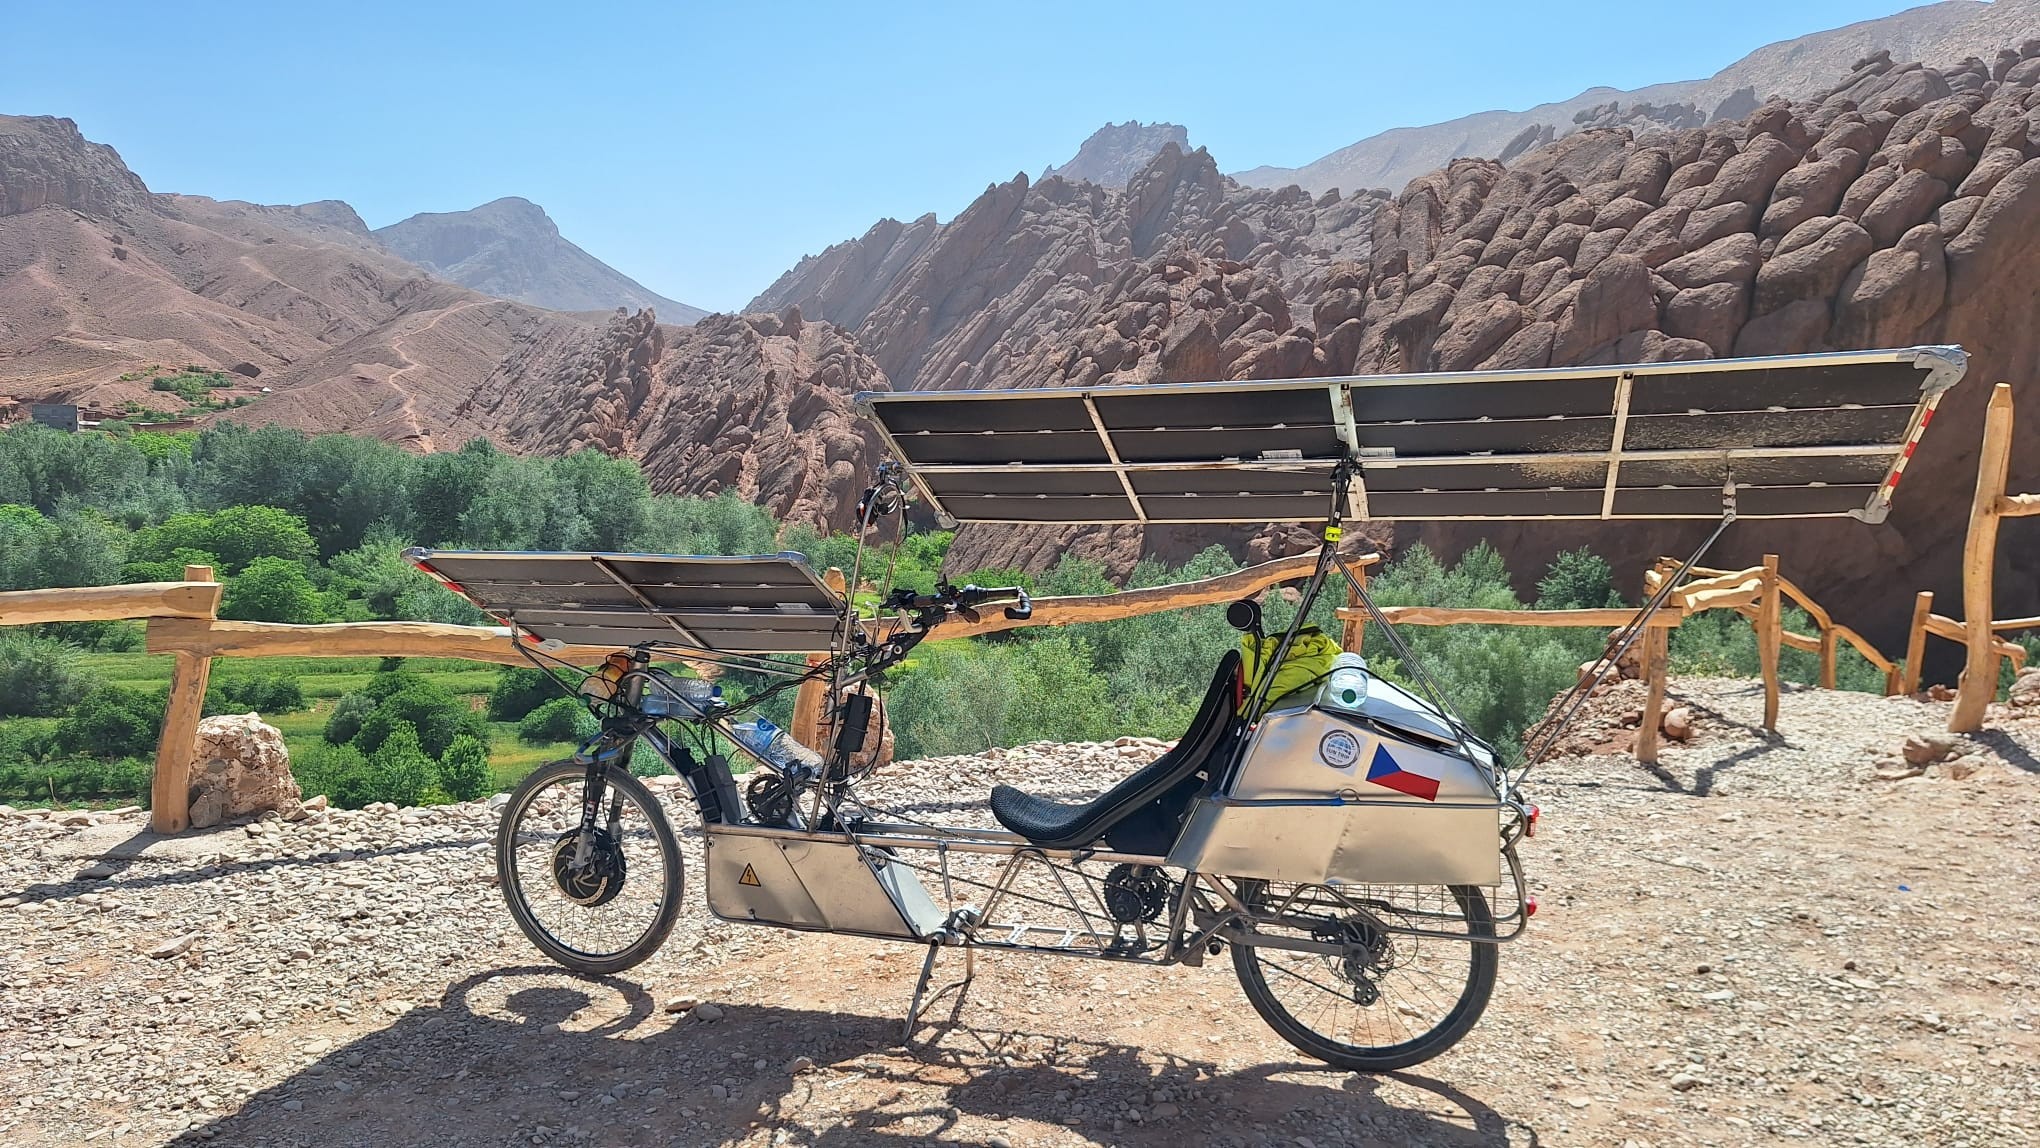 Solar bike parked at Dades gorge viewpoint. Green oasis on valley floor, brown scenic rocks, blue sky.